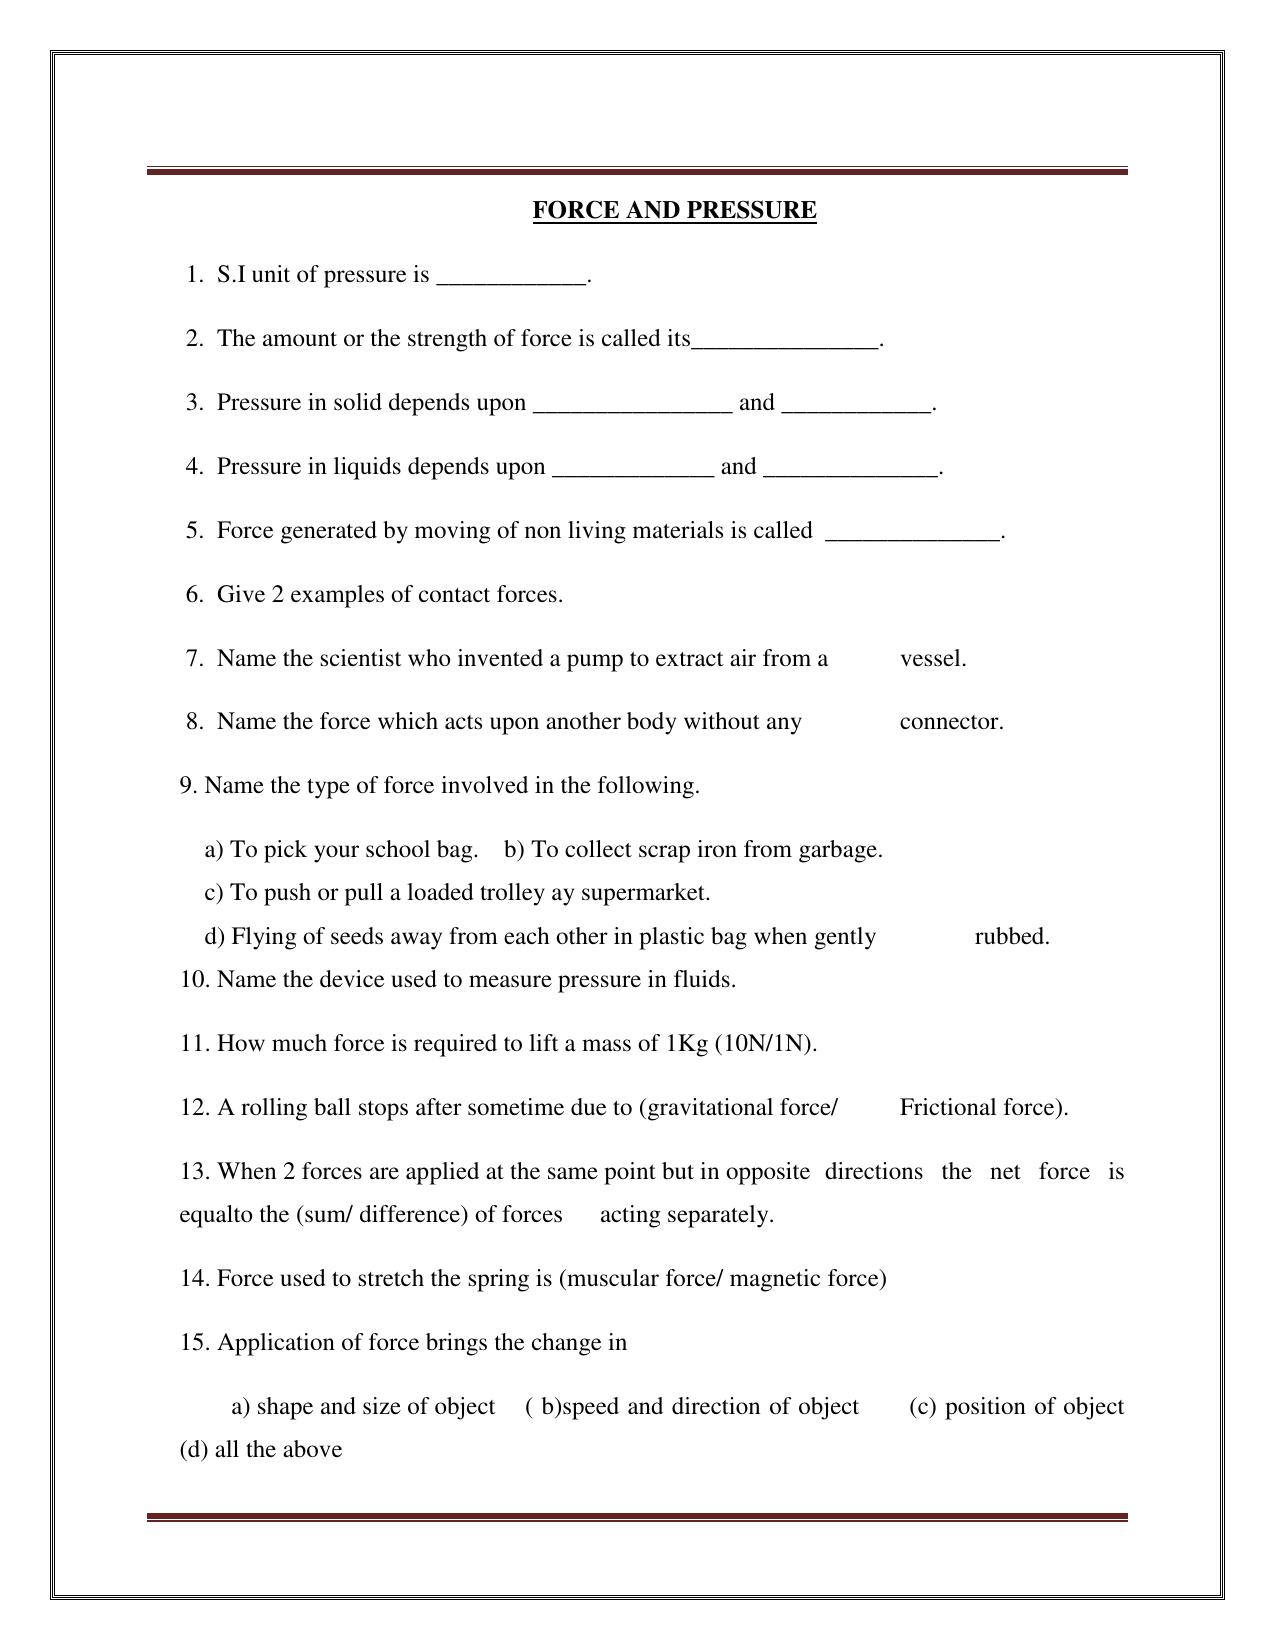 CBSE Worksheets for Class 8 Science Force And Pressure Part B Assignment - Page 1